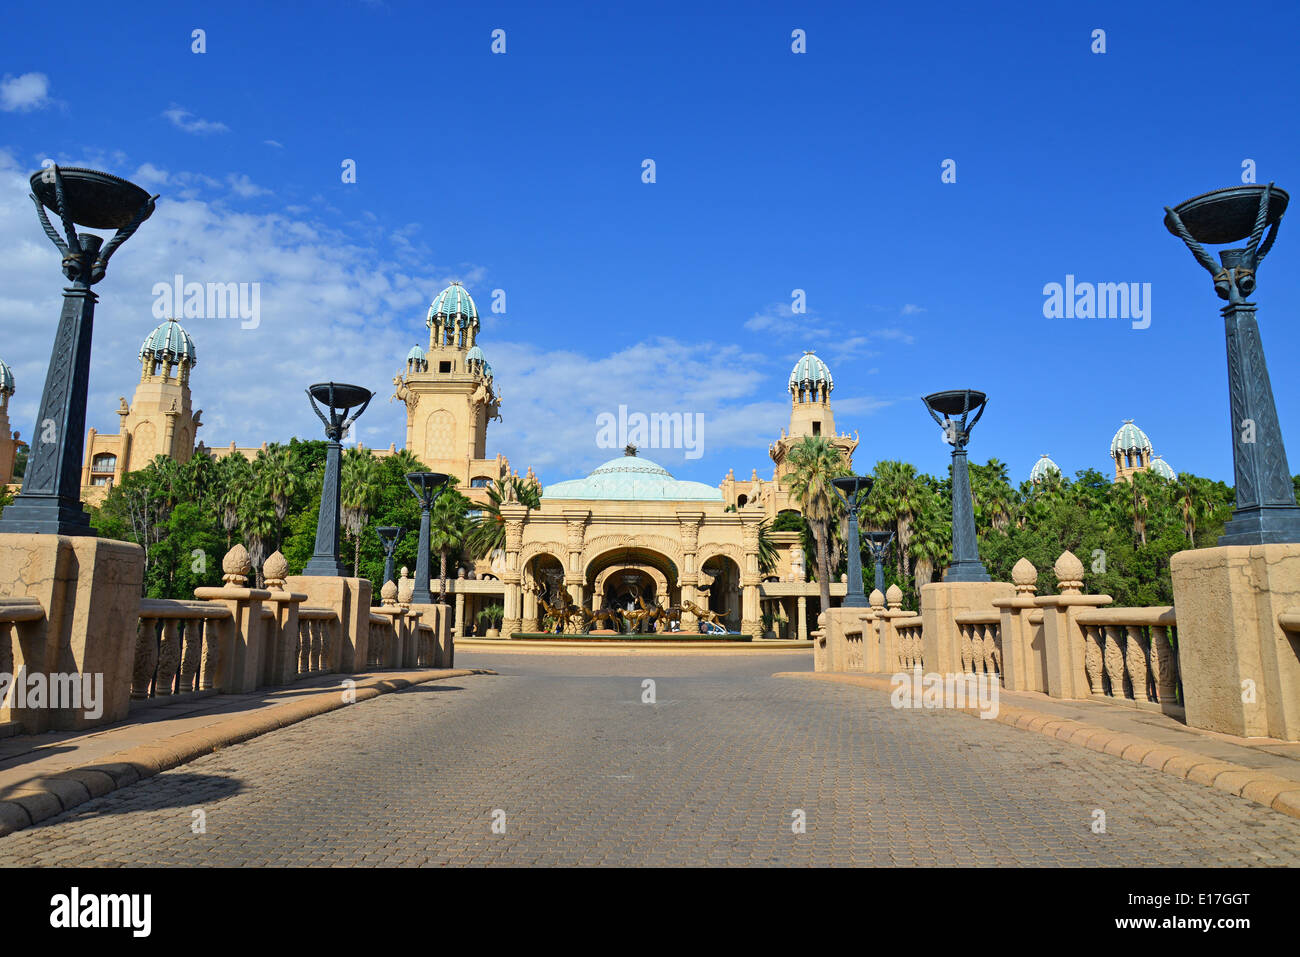 Palace of the Lost City, Sun City Resort, Pilanesberg, North West Province, Republic of South Africa Stock Photo